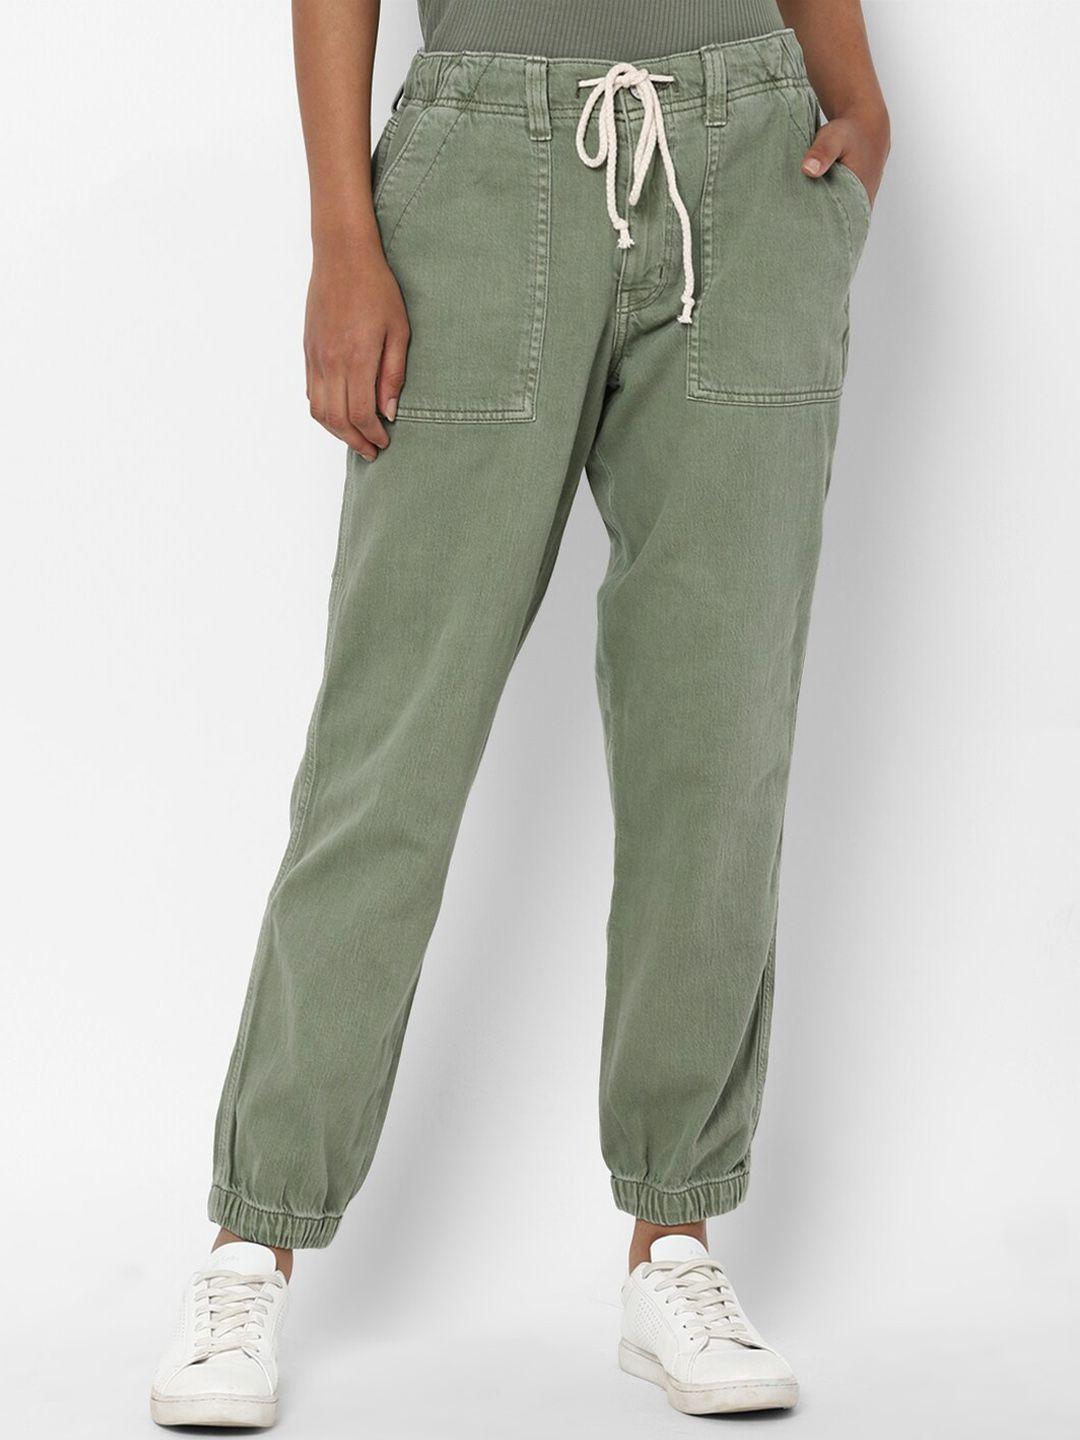 american-eagle-outfitters-women-green-solid-slim-fit-jogger-track-pant